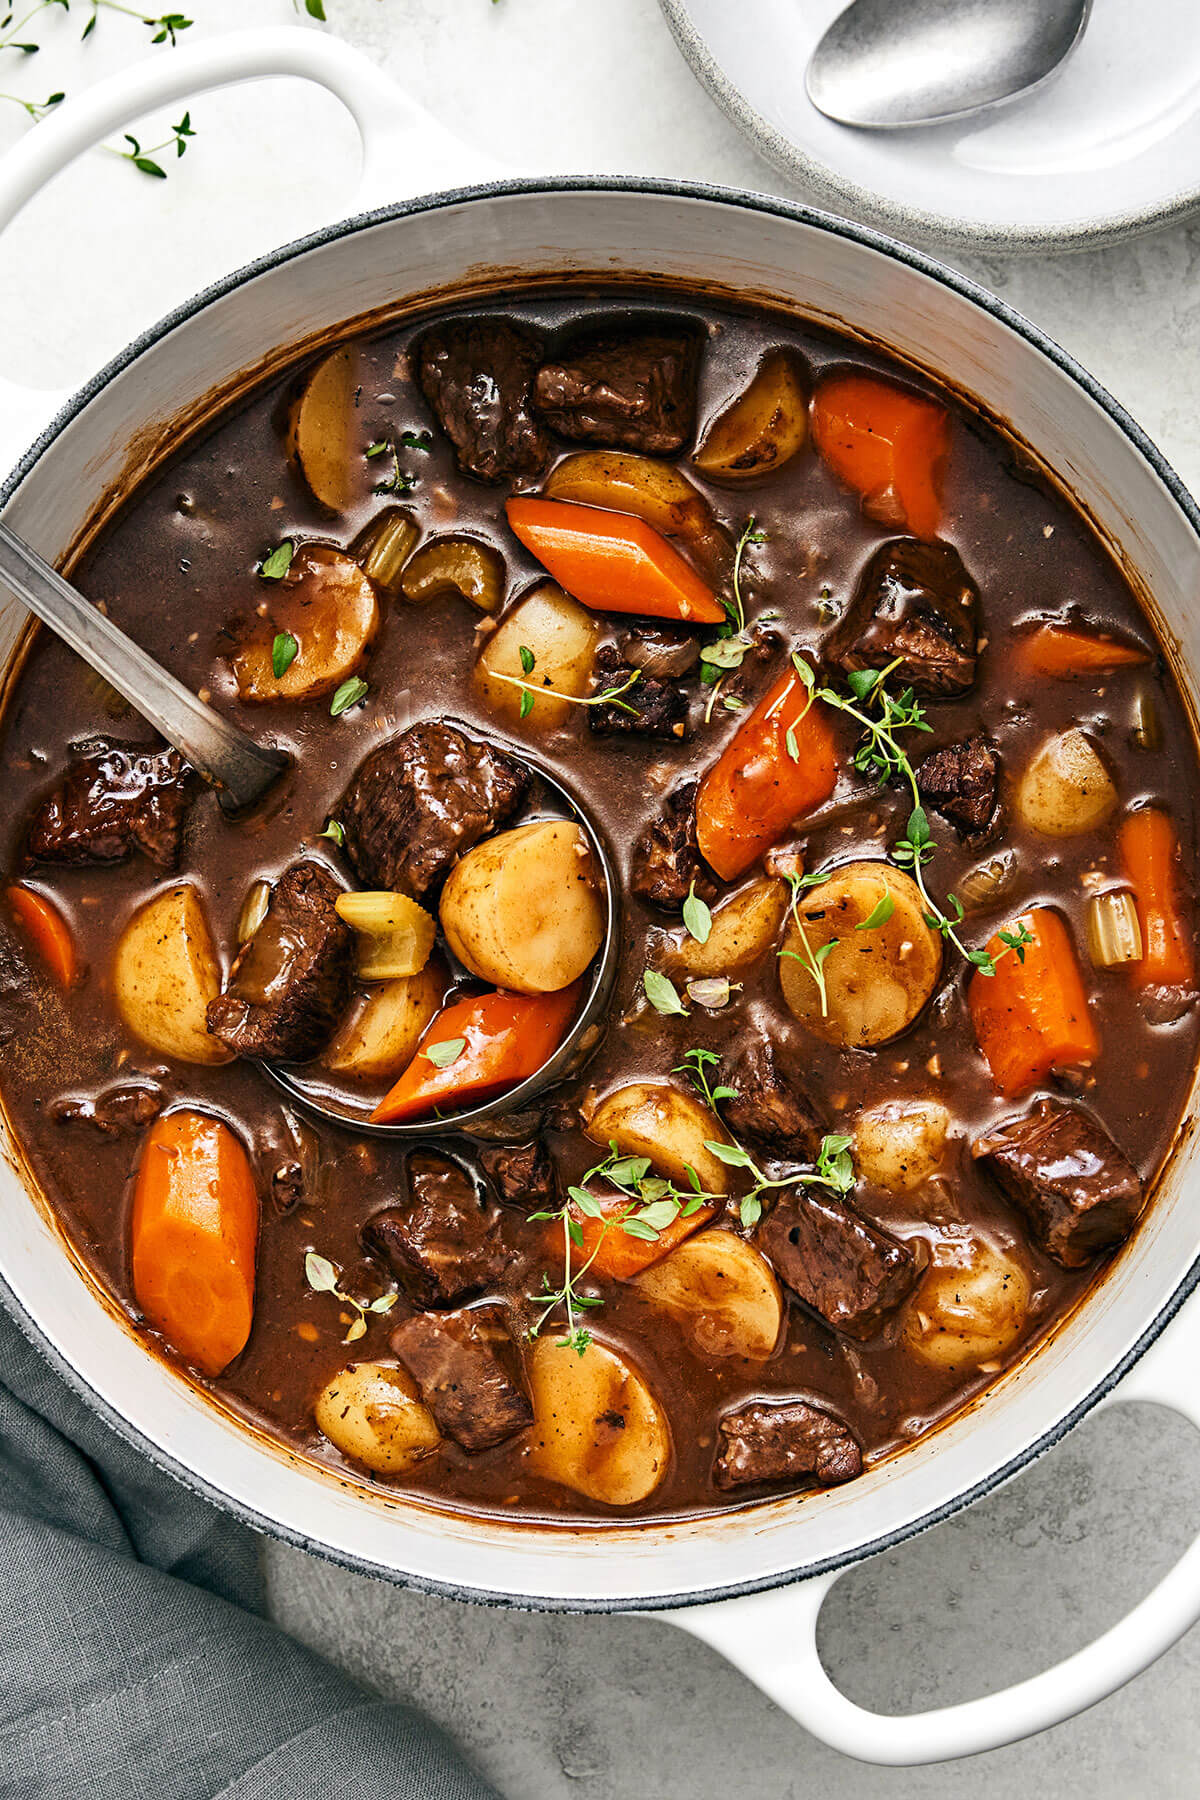 Beef stew in a large pot